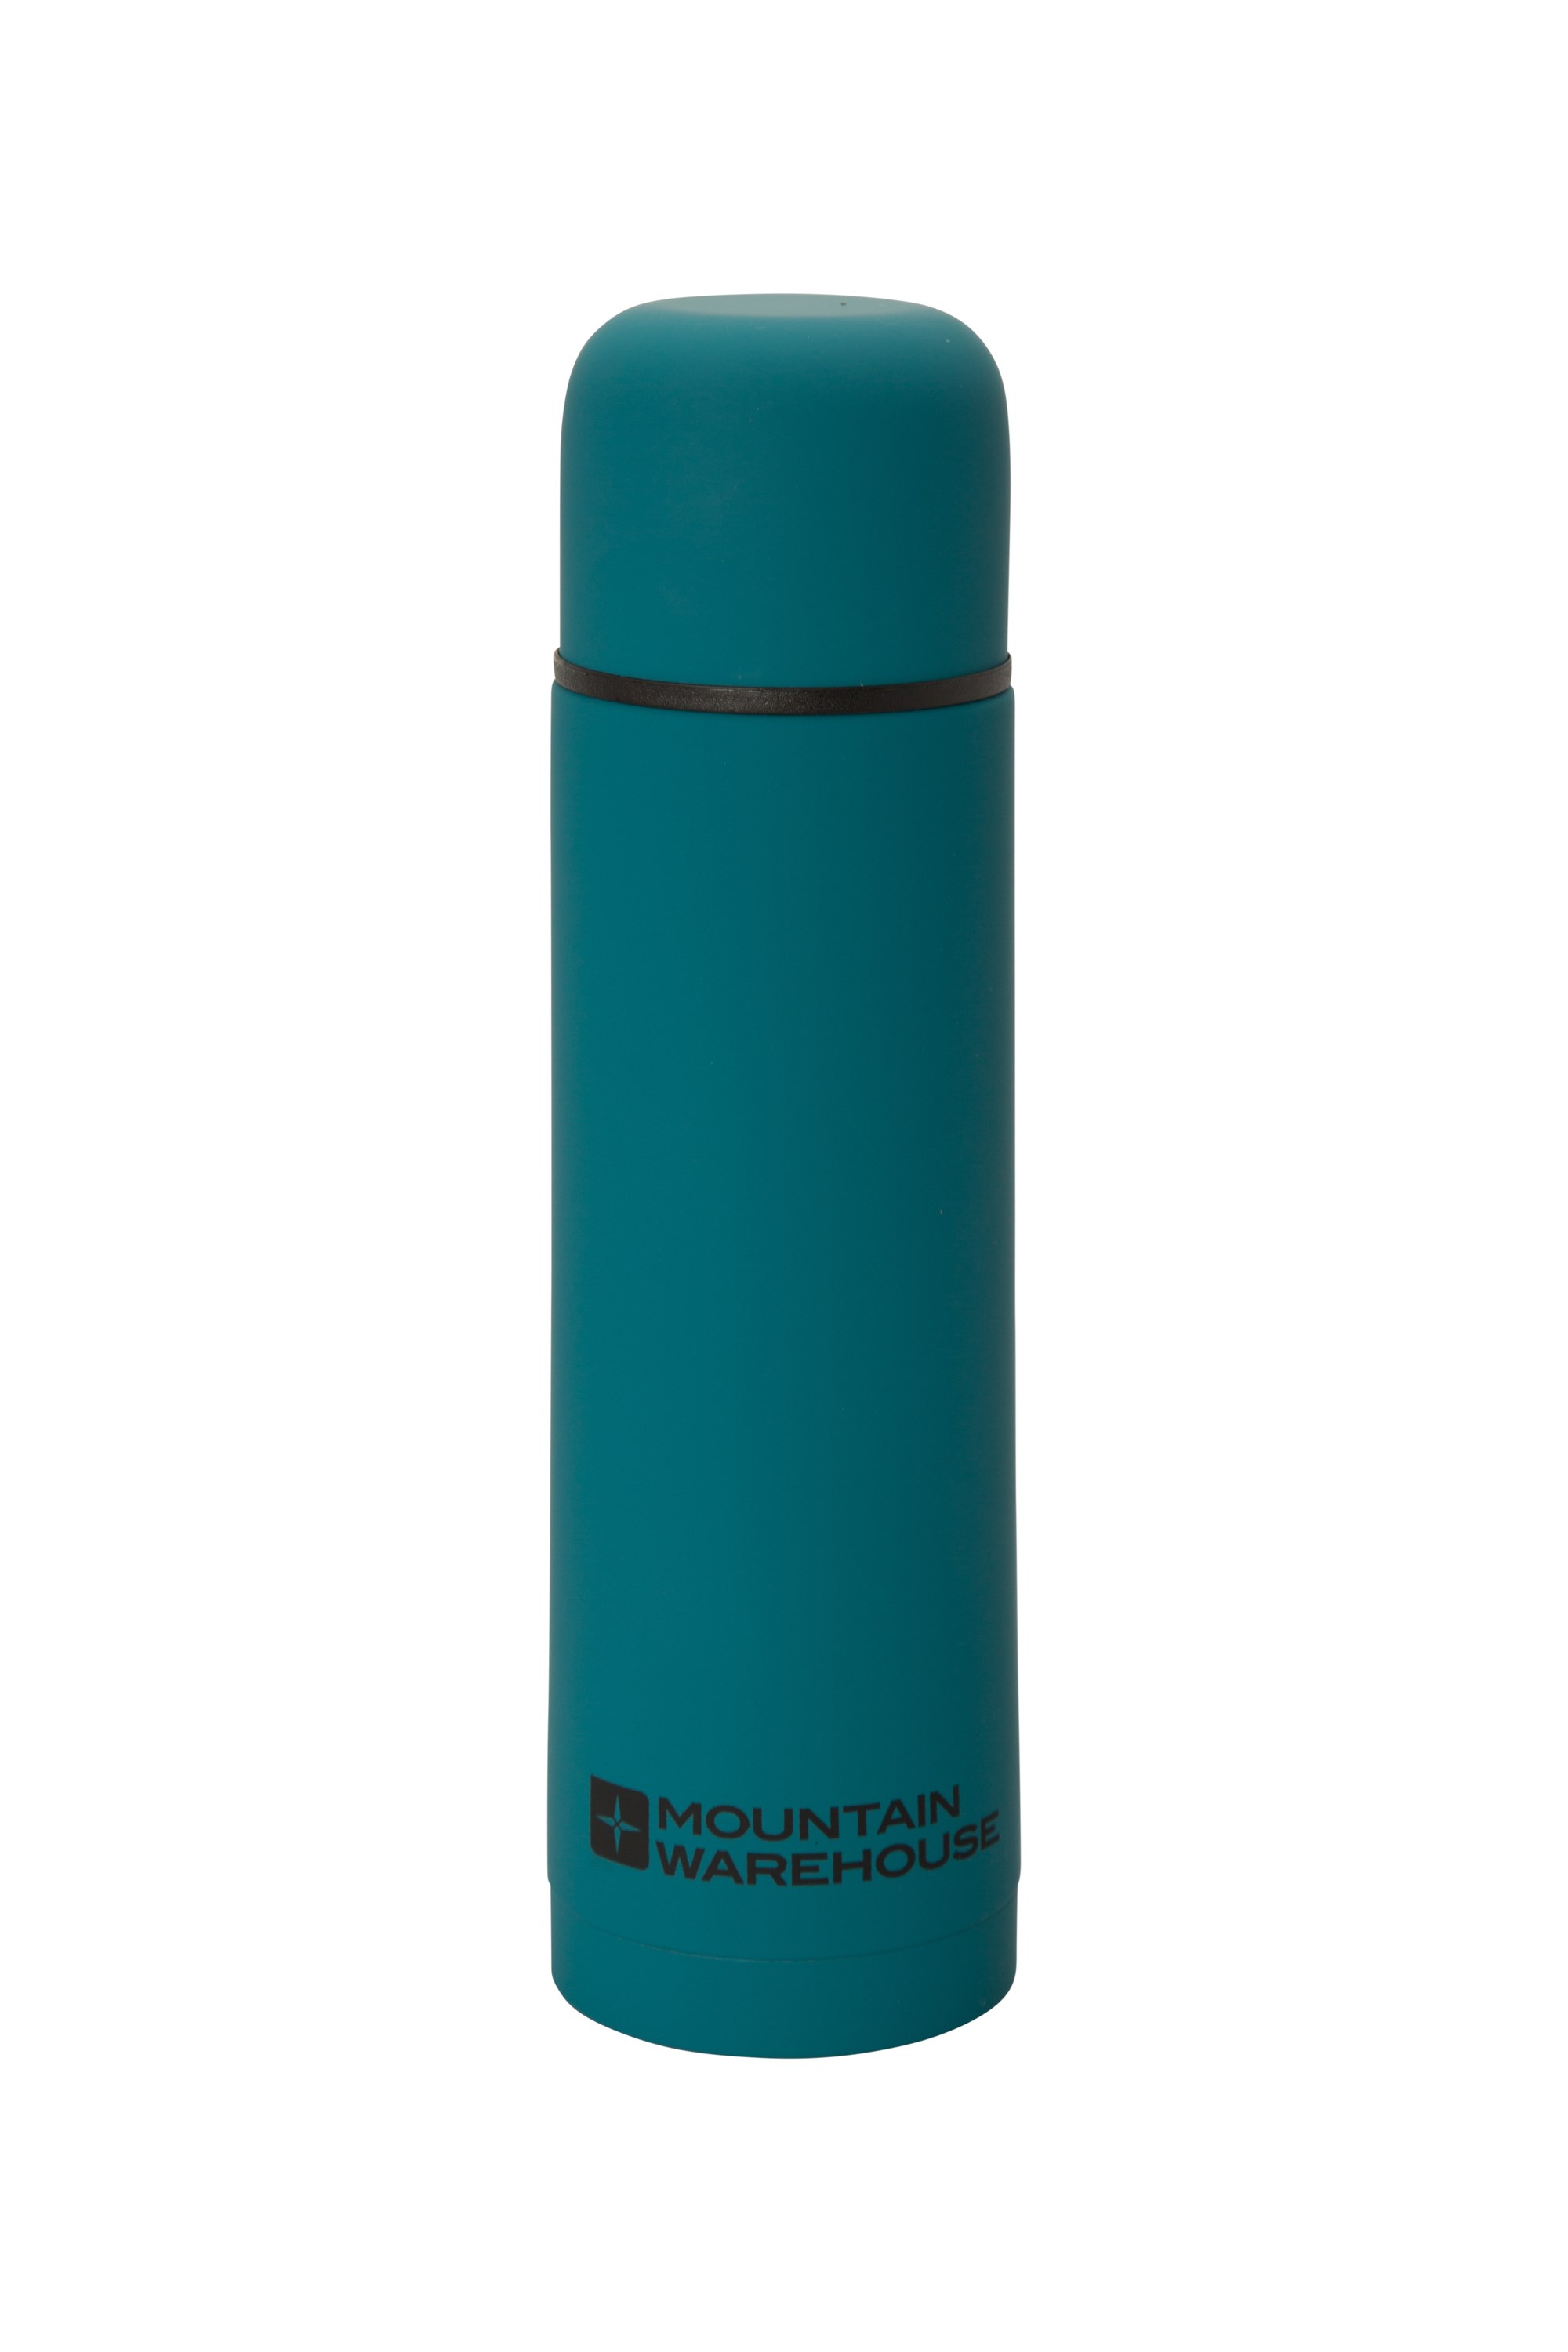 Double Walled Rubber Finish Flask - 500ml - Teal